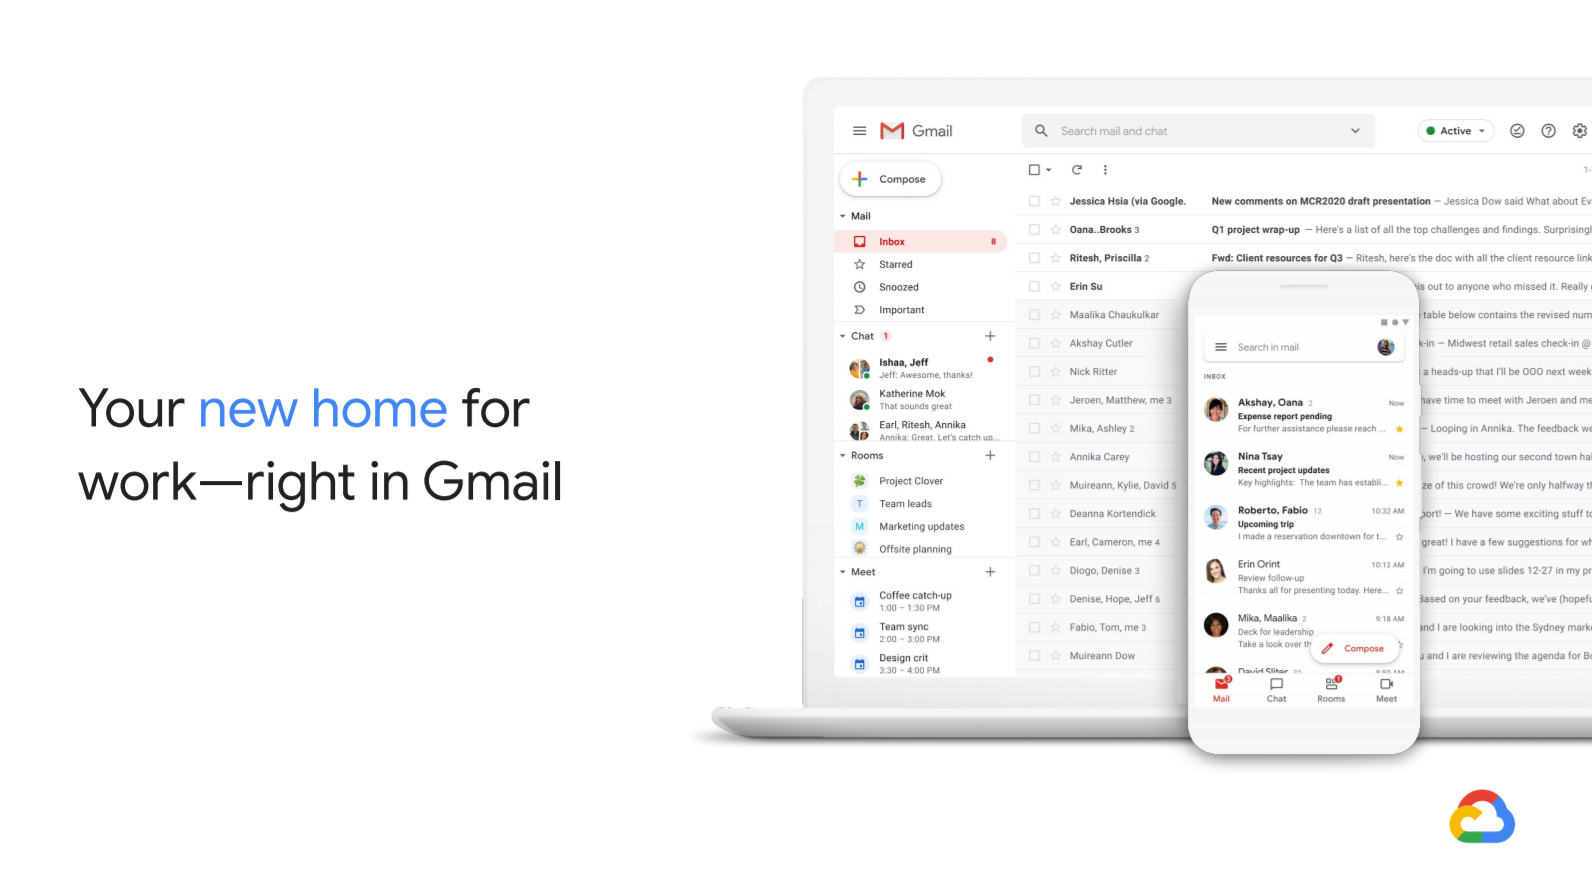 Leaked Gmail redesign outs plans to integrate Docs, Chat, and Meet